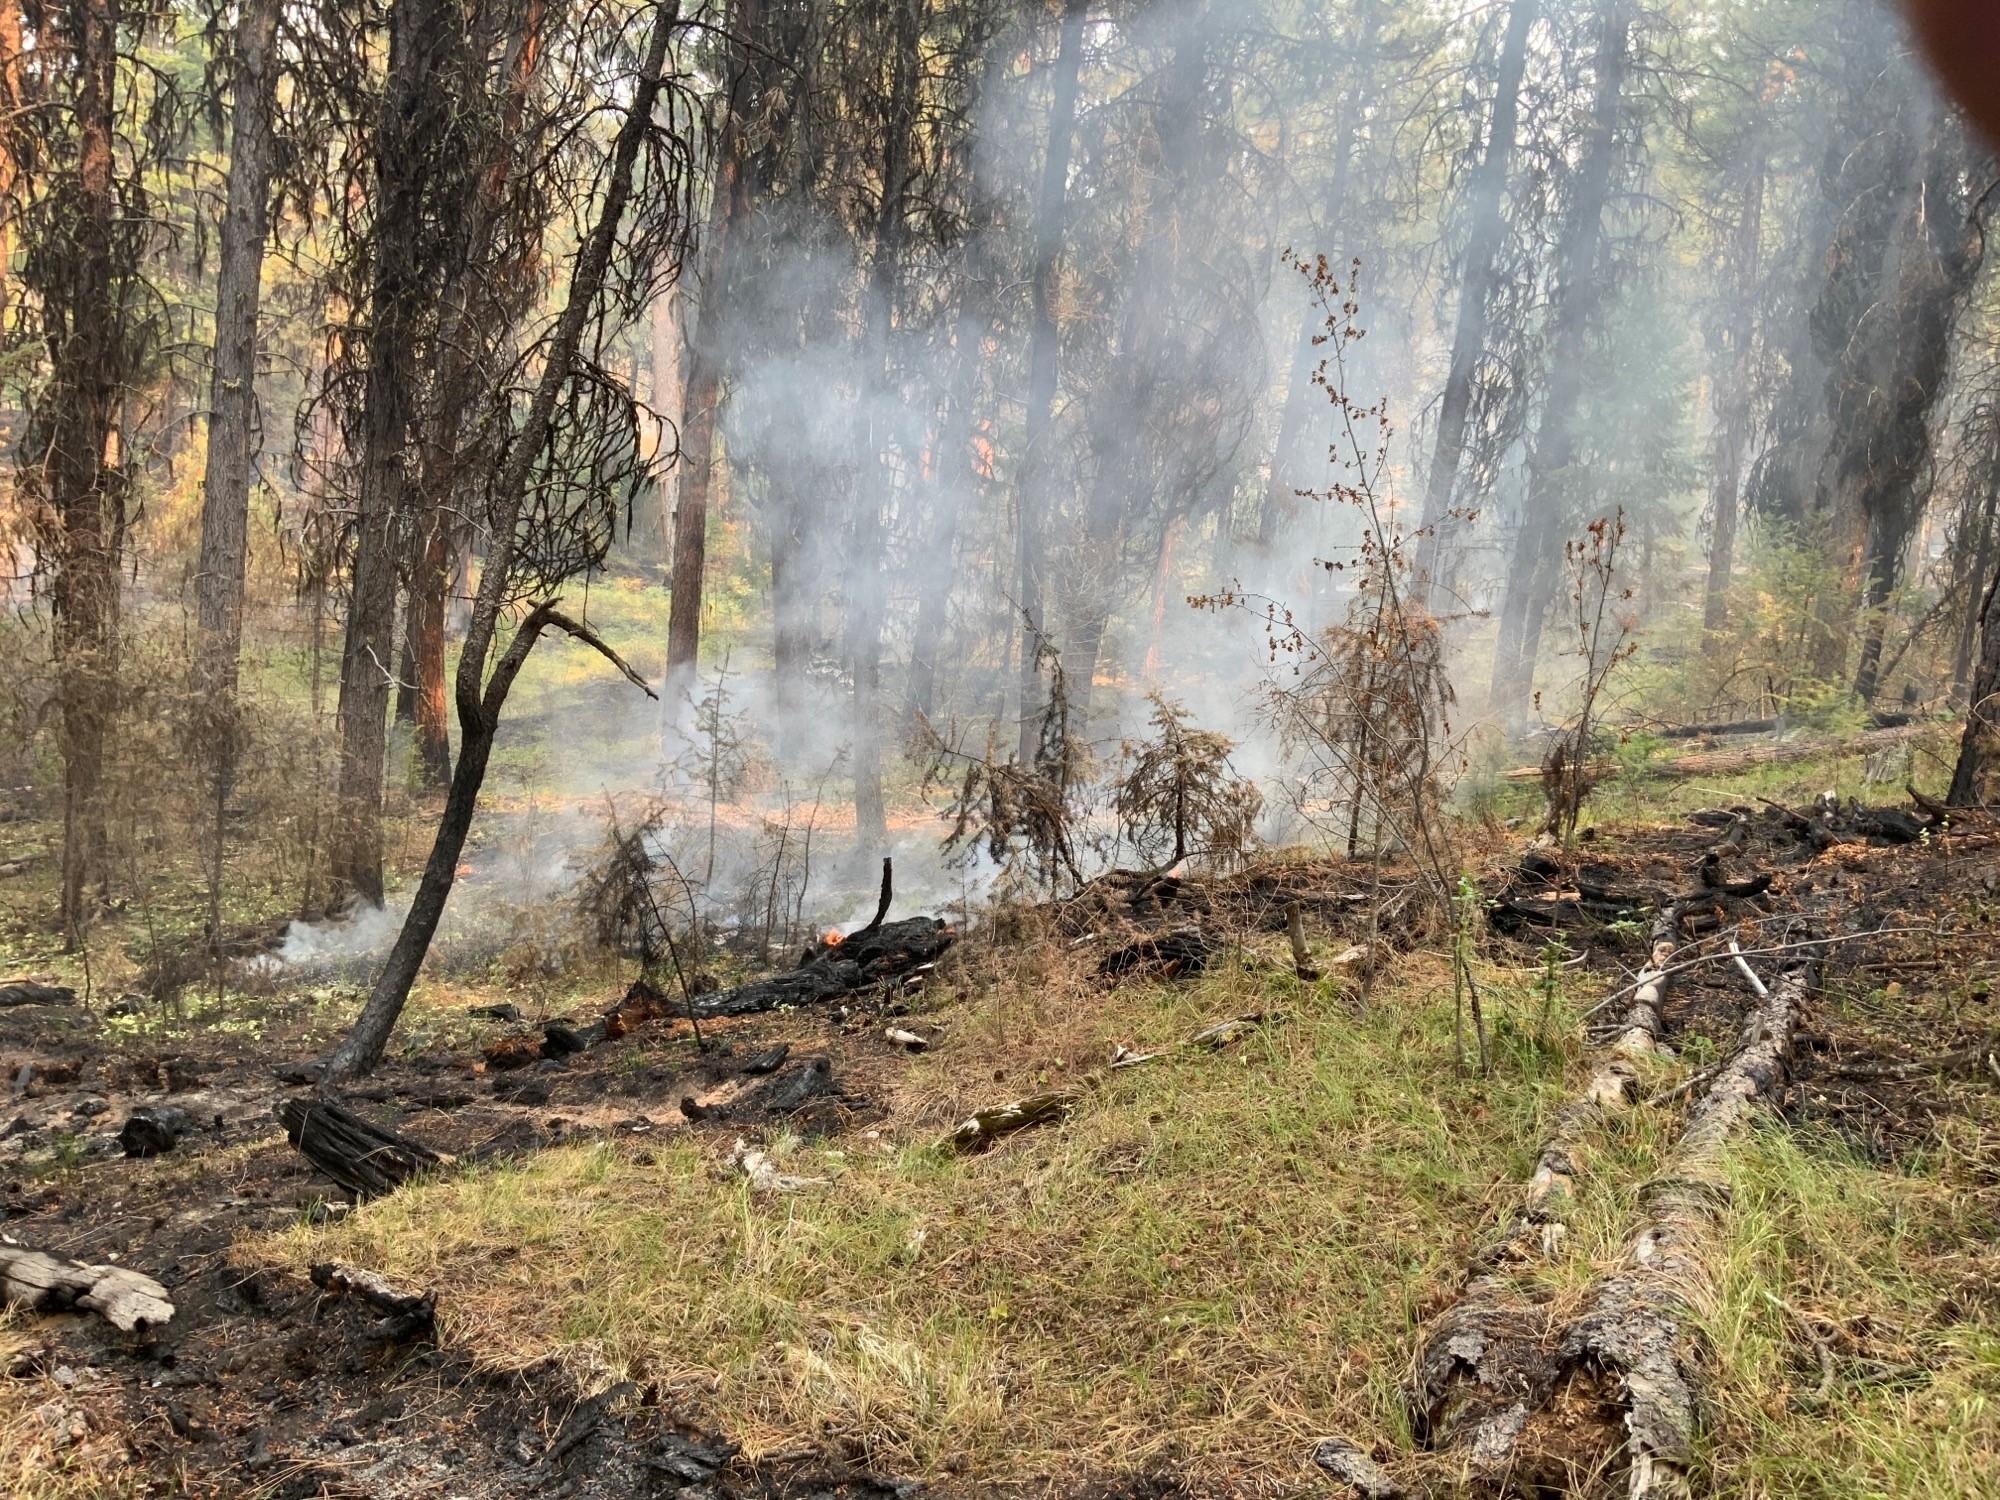 Images from Murderers Creek 6 prescribed fire area showing light smoke rising wooded area. 